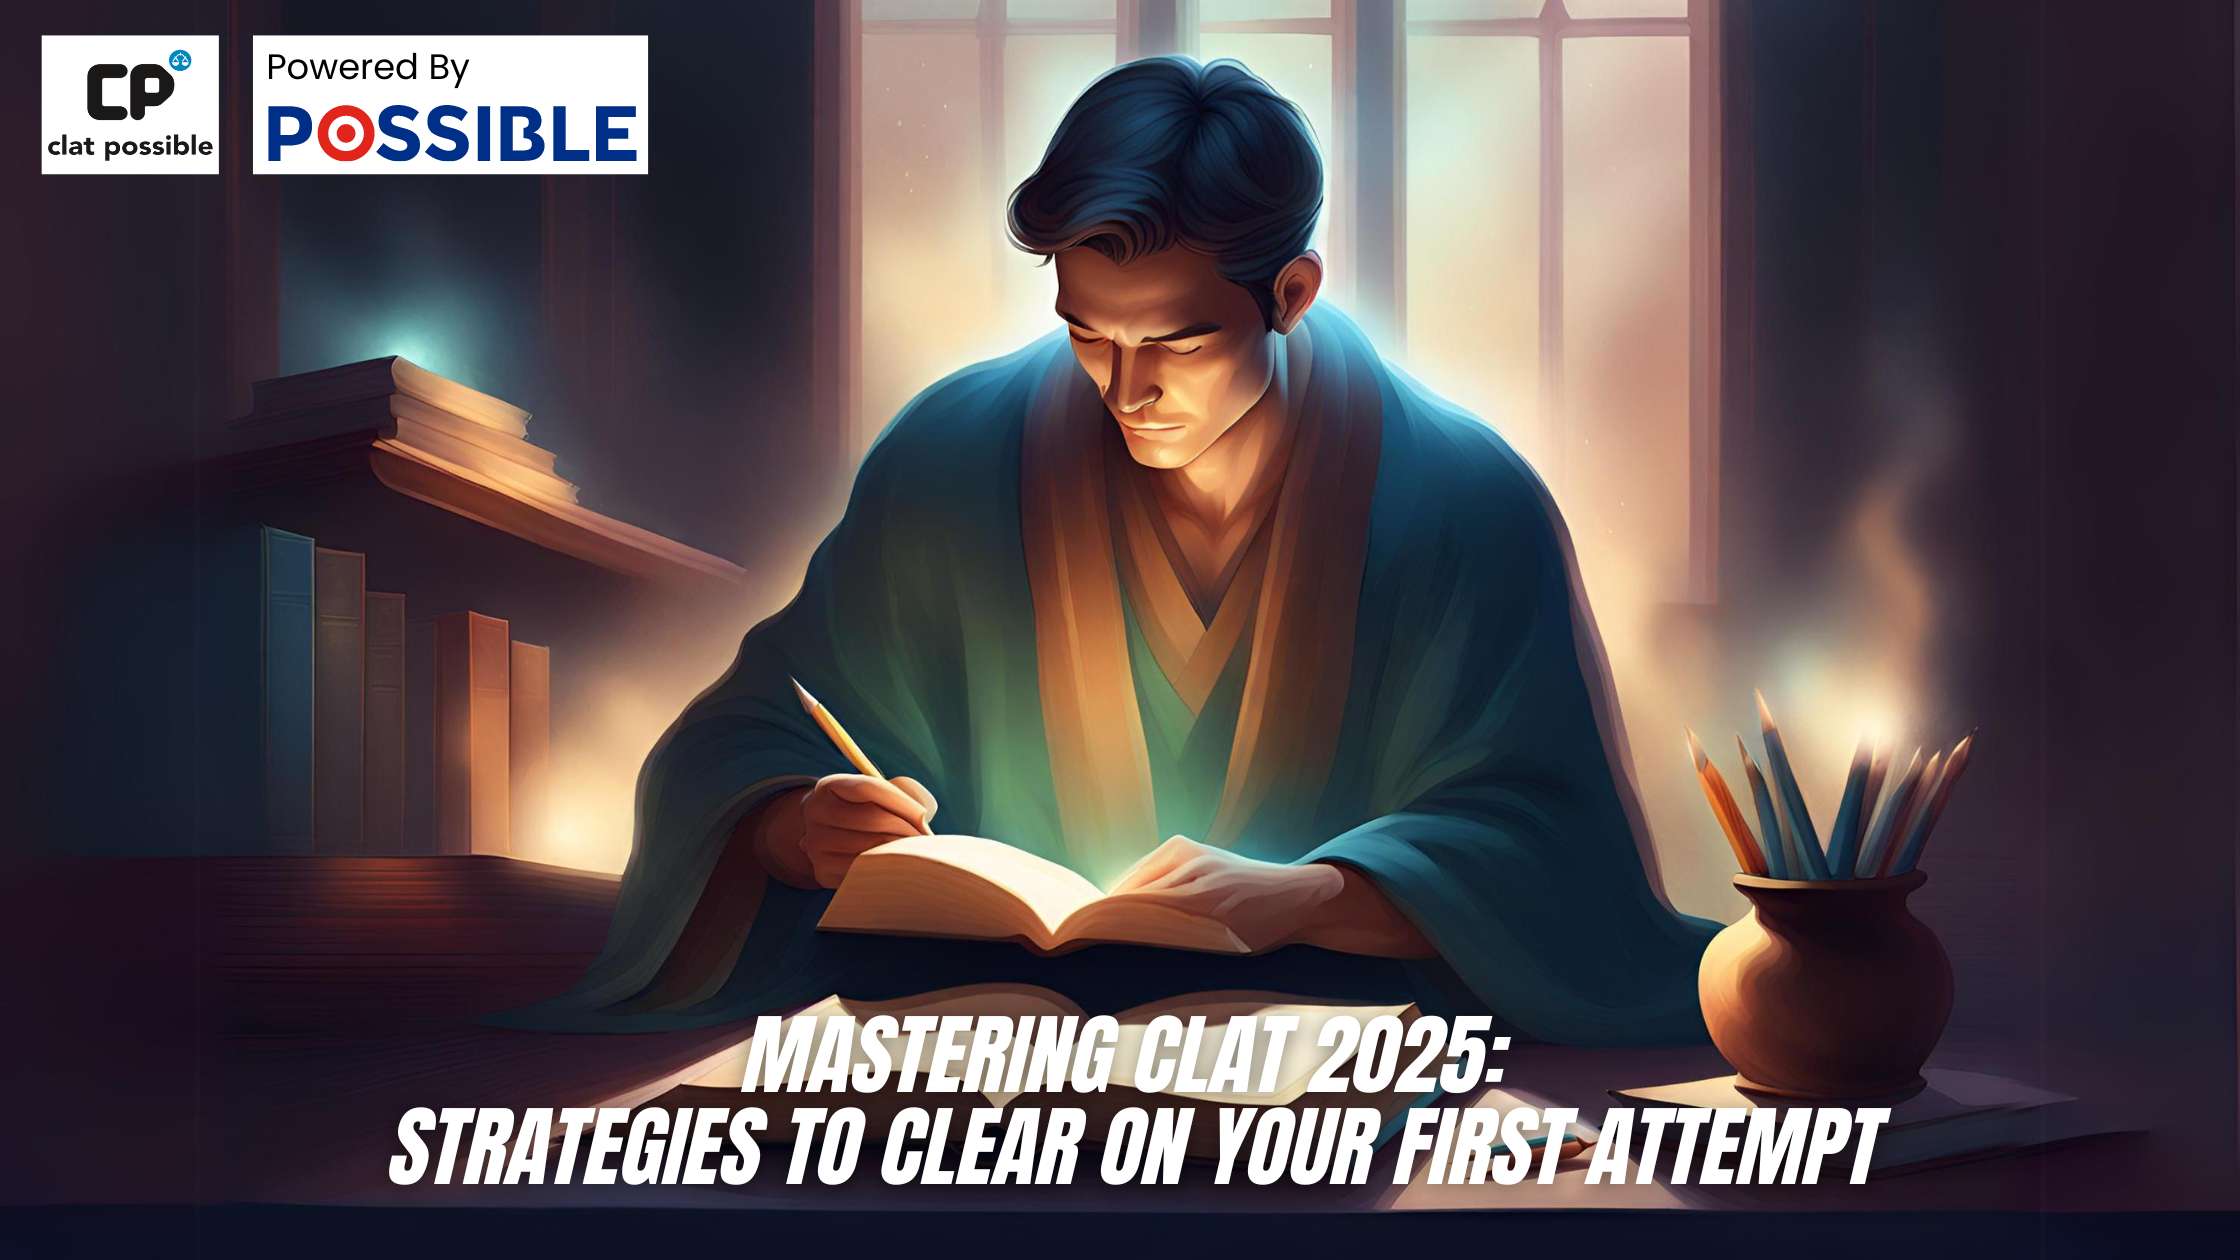 Mastering CLAT 2025: Strategies to Clear on Your First Attempt